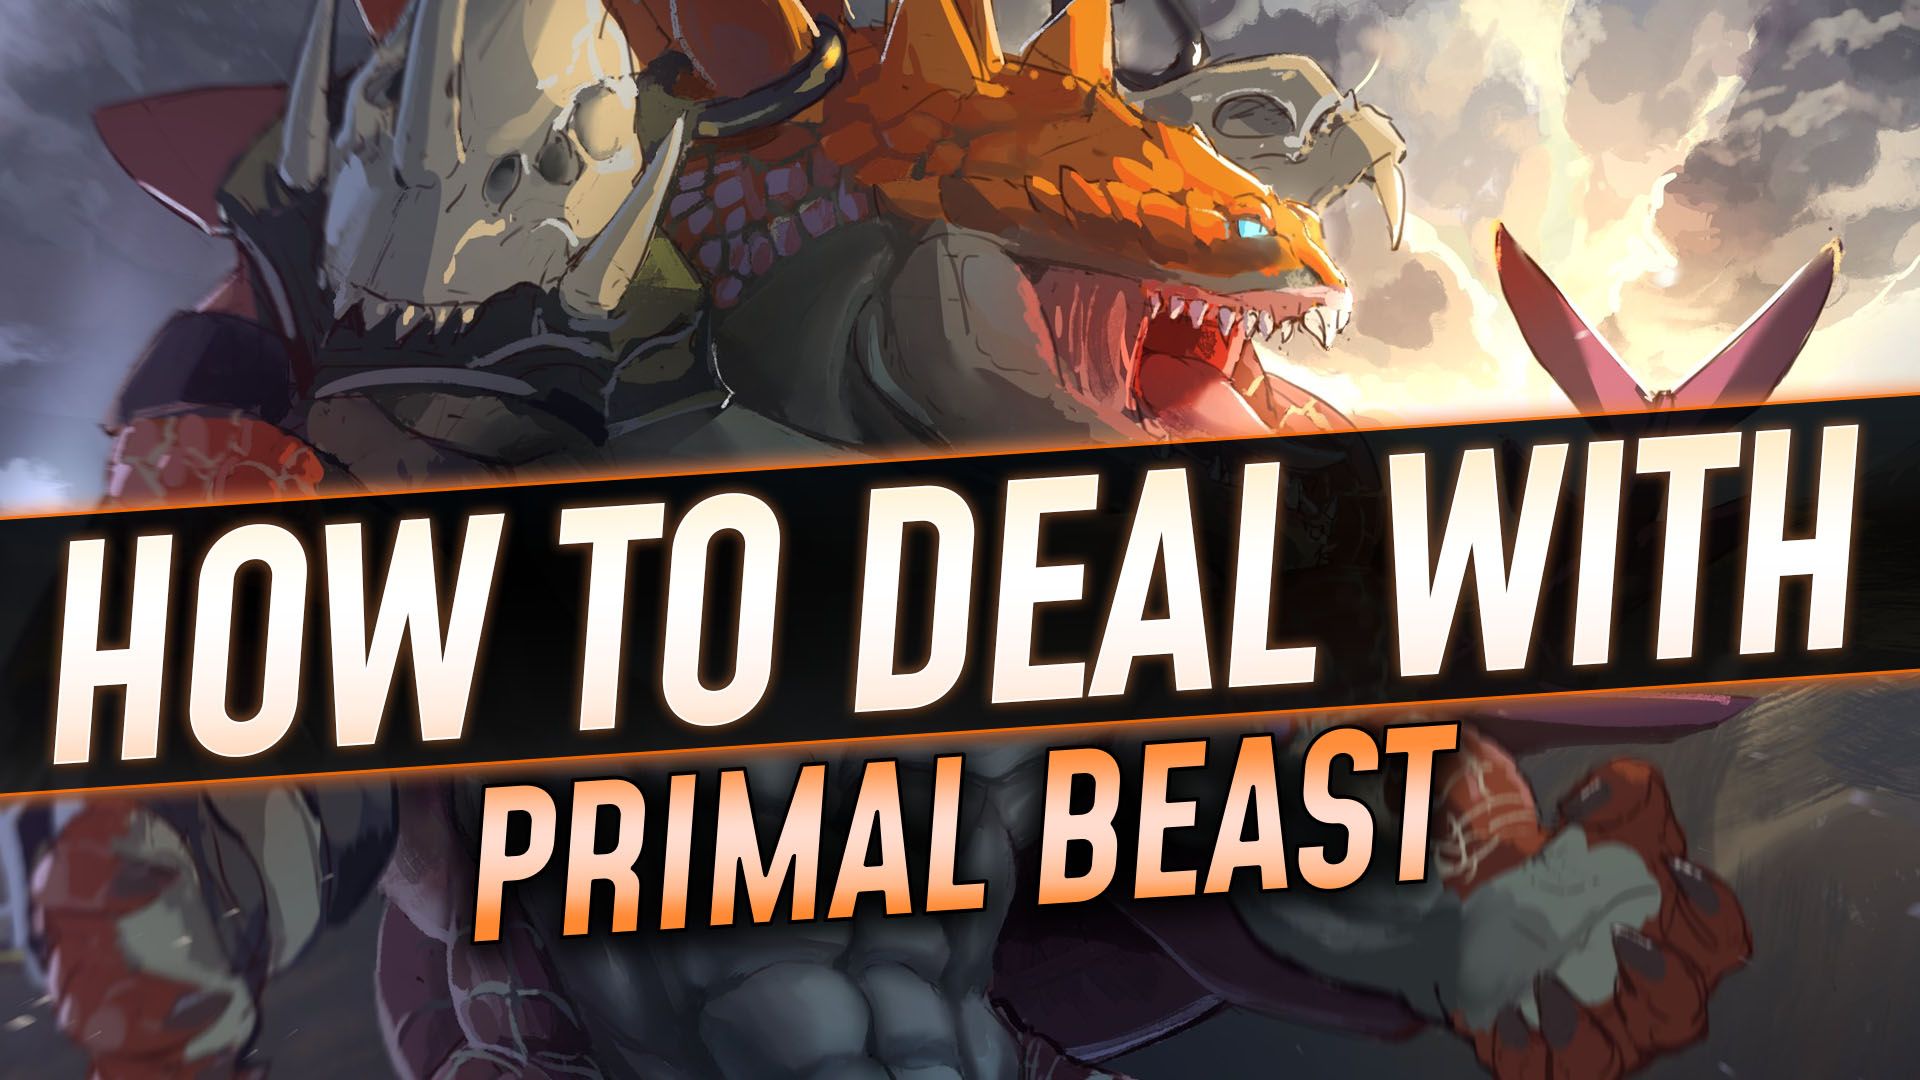 How to Deal with Primal Beast in Lane - GameLeap